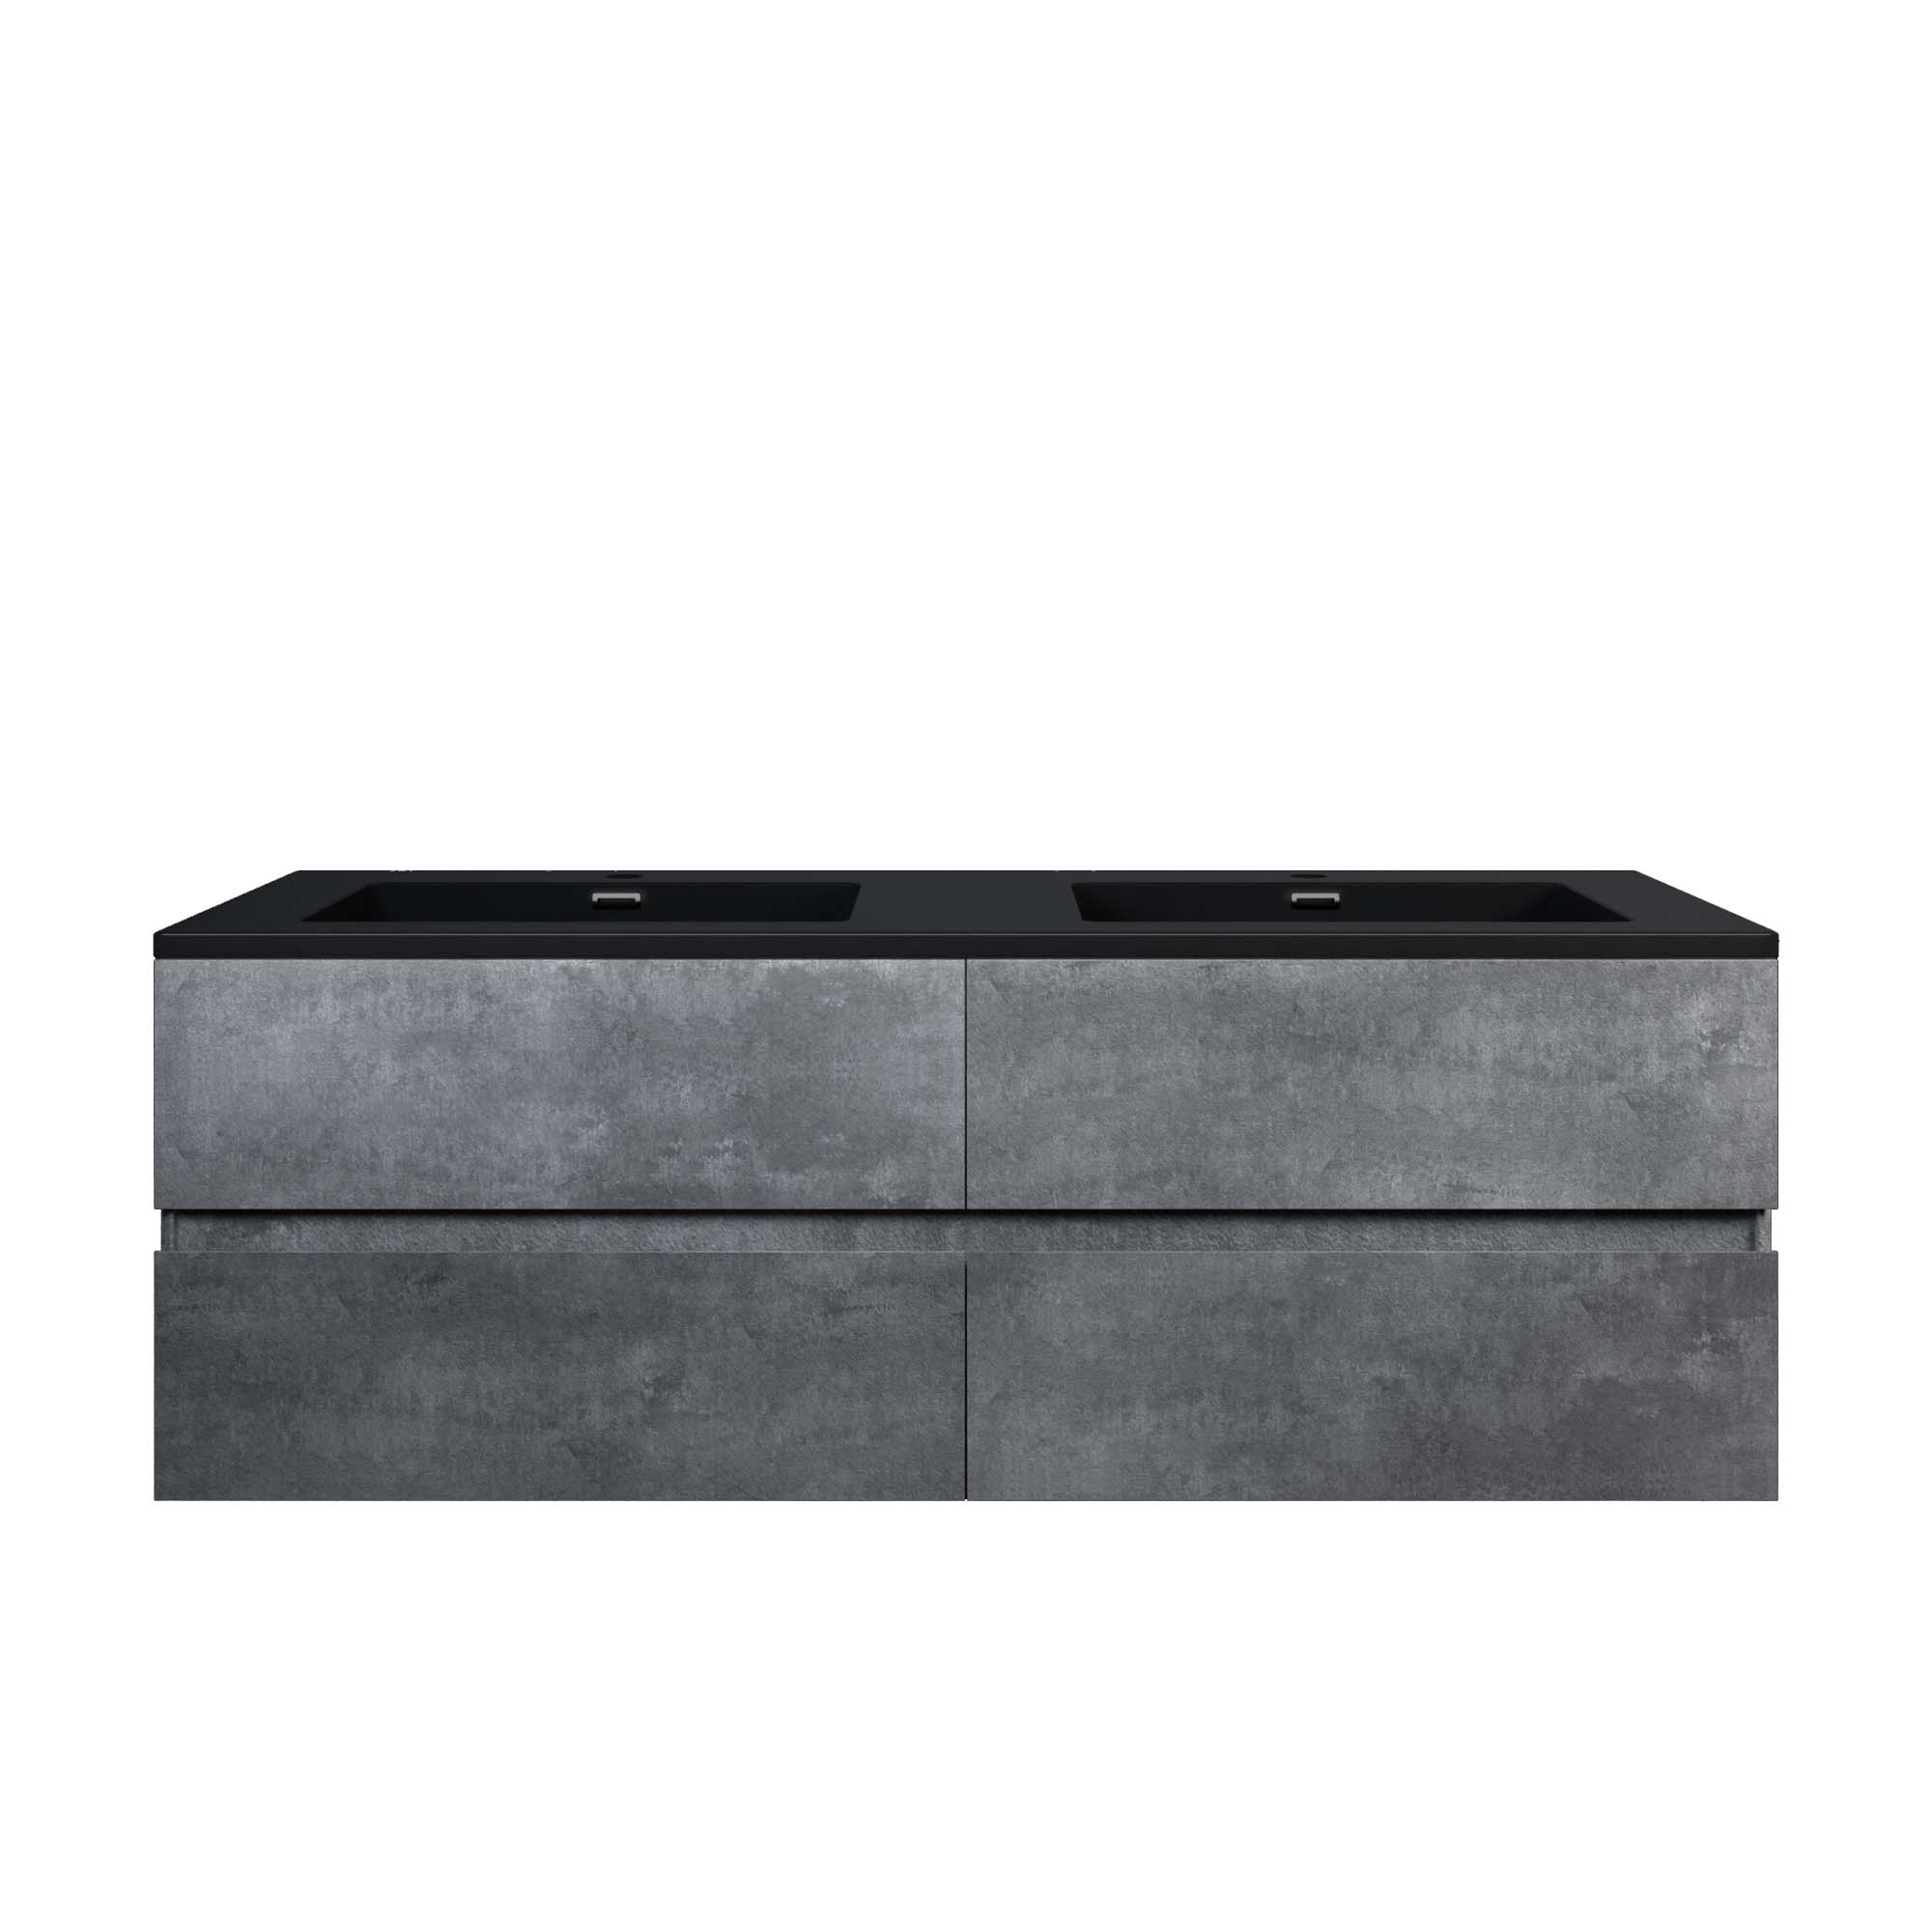  WOODBRIDGE 59 in. W x 18-7/8 in. D Contemporary Wall Hung Floating Vanity in Gray with Quartz Sand Composite Vanity Top in Black with matching finish sink._12663